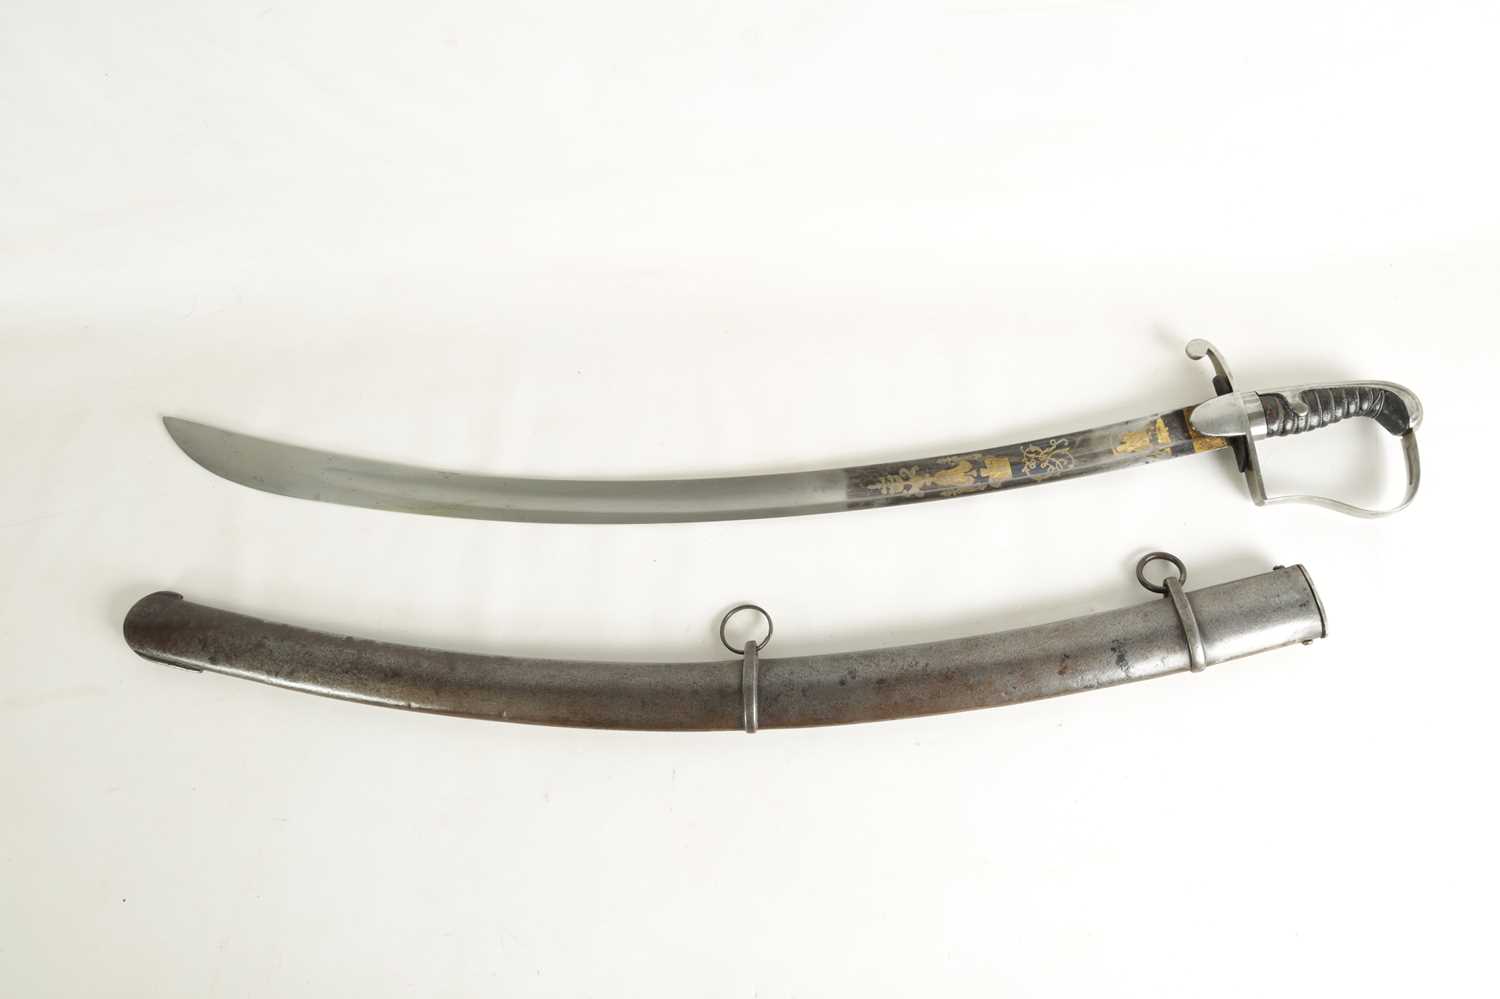 A BRITISH PATTERN 1796 LIGHT CAVALRY OFFICER'S SABRE - Image 4 of 10